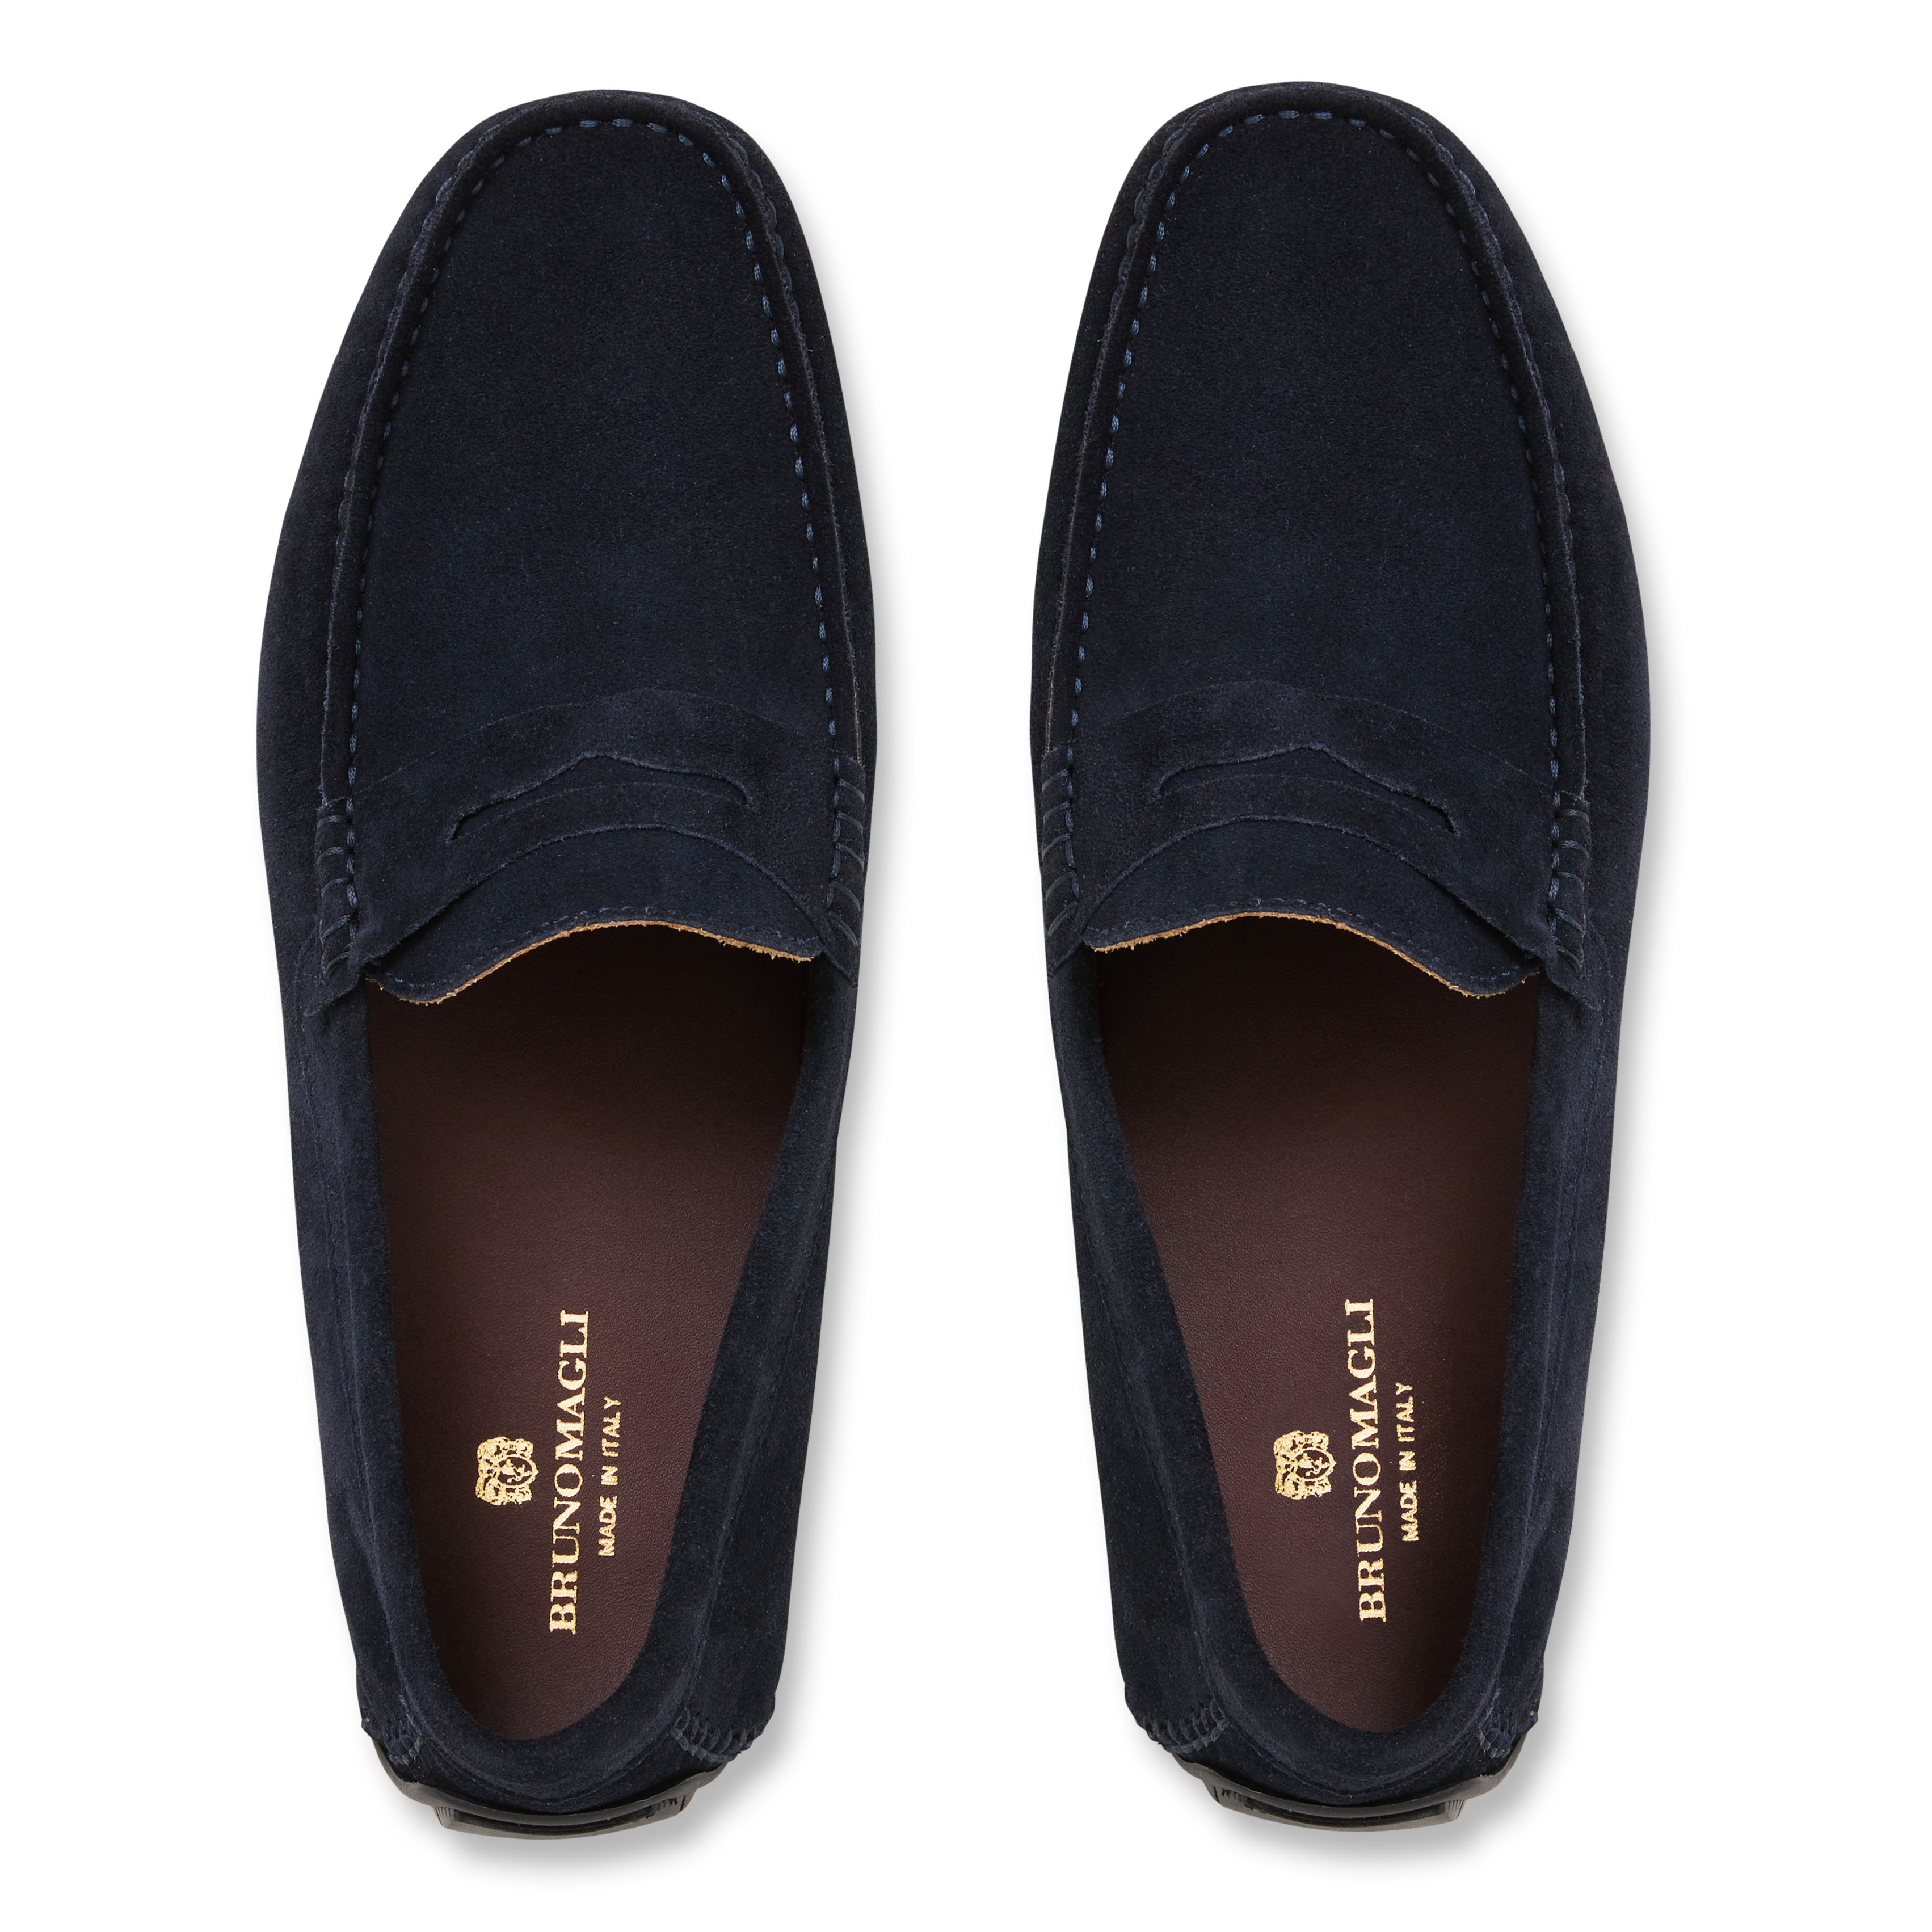 XANE CASUAL SUEDE SLIP-ON DRIVING MOCCASIN-NAVY – Bruno Magli